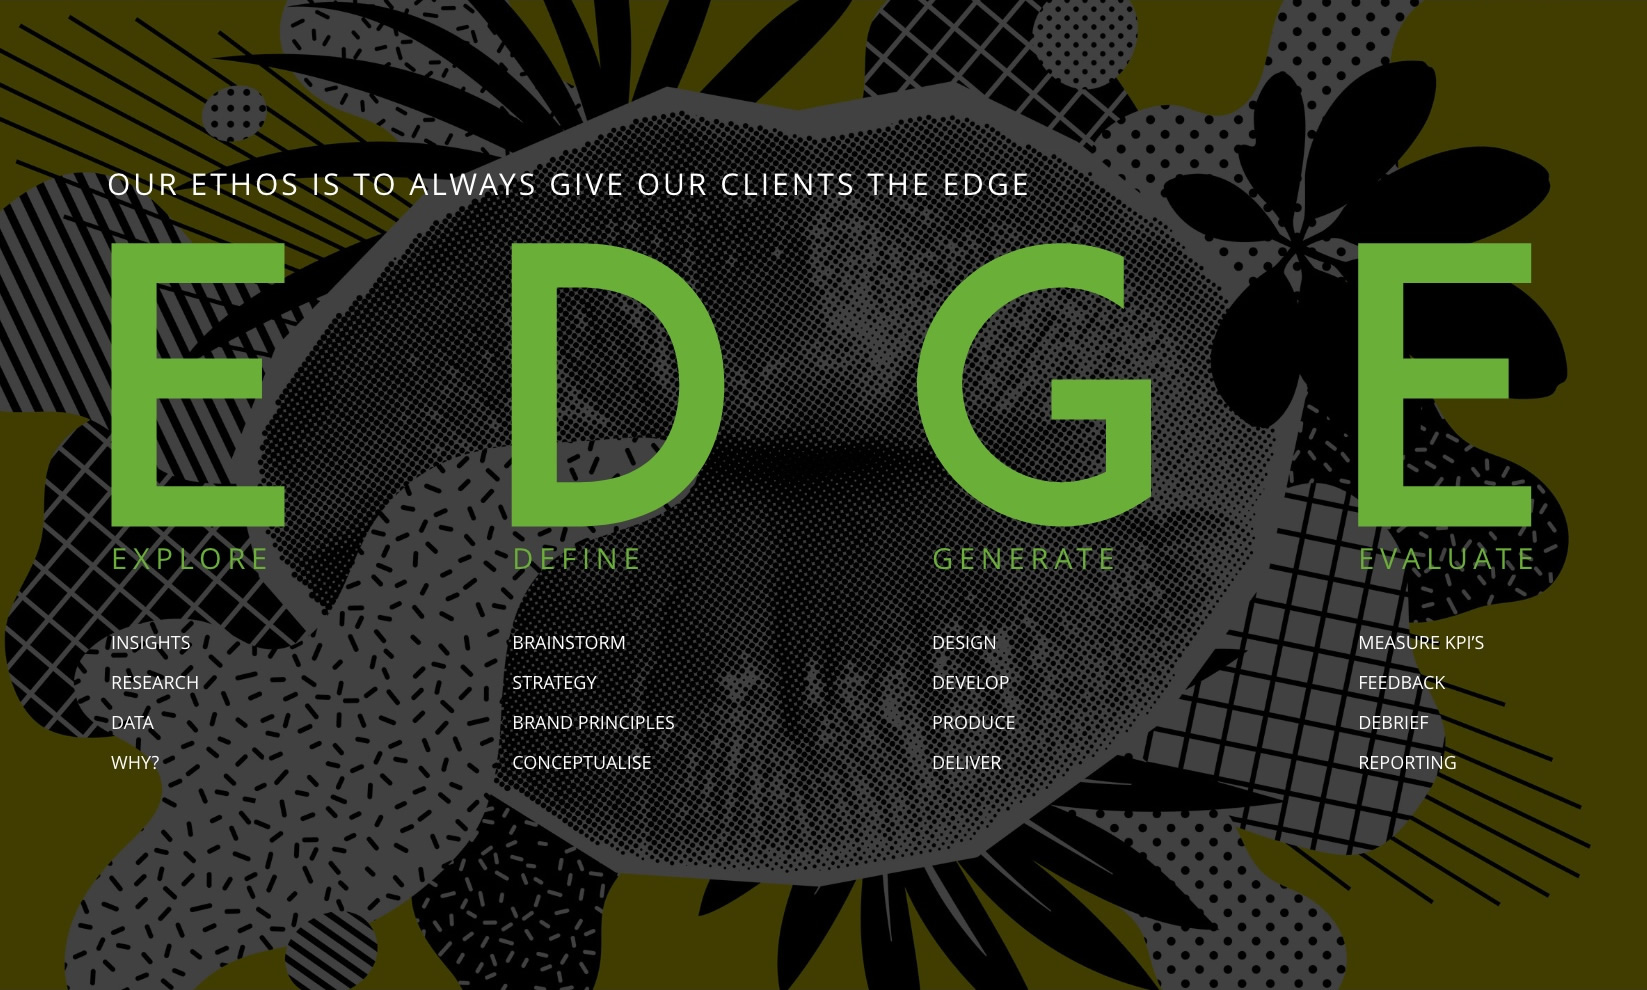 Our ethos is to always give our clients the edge